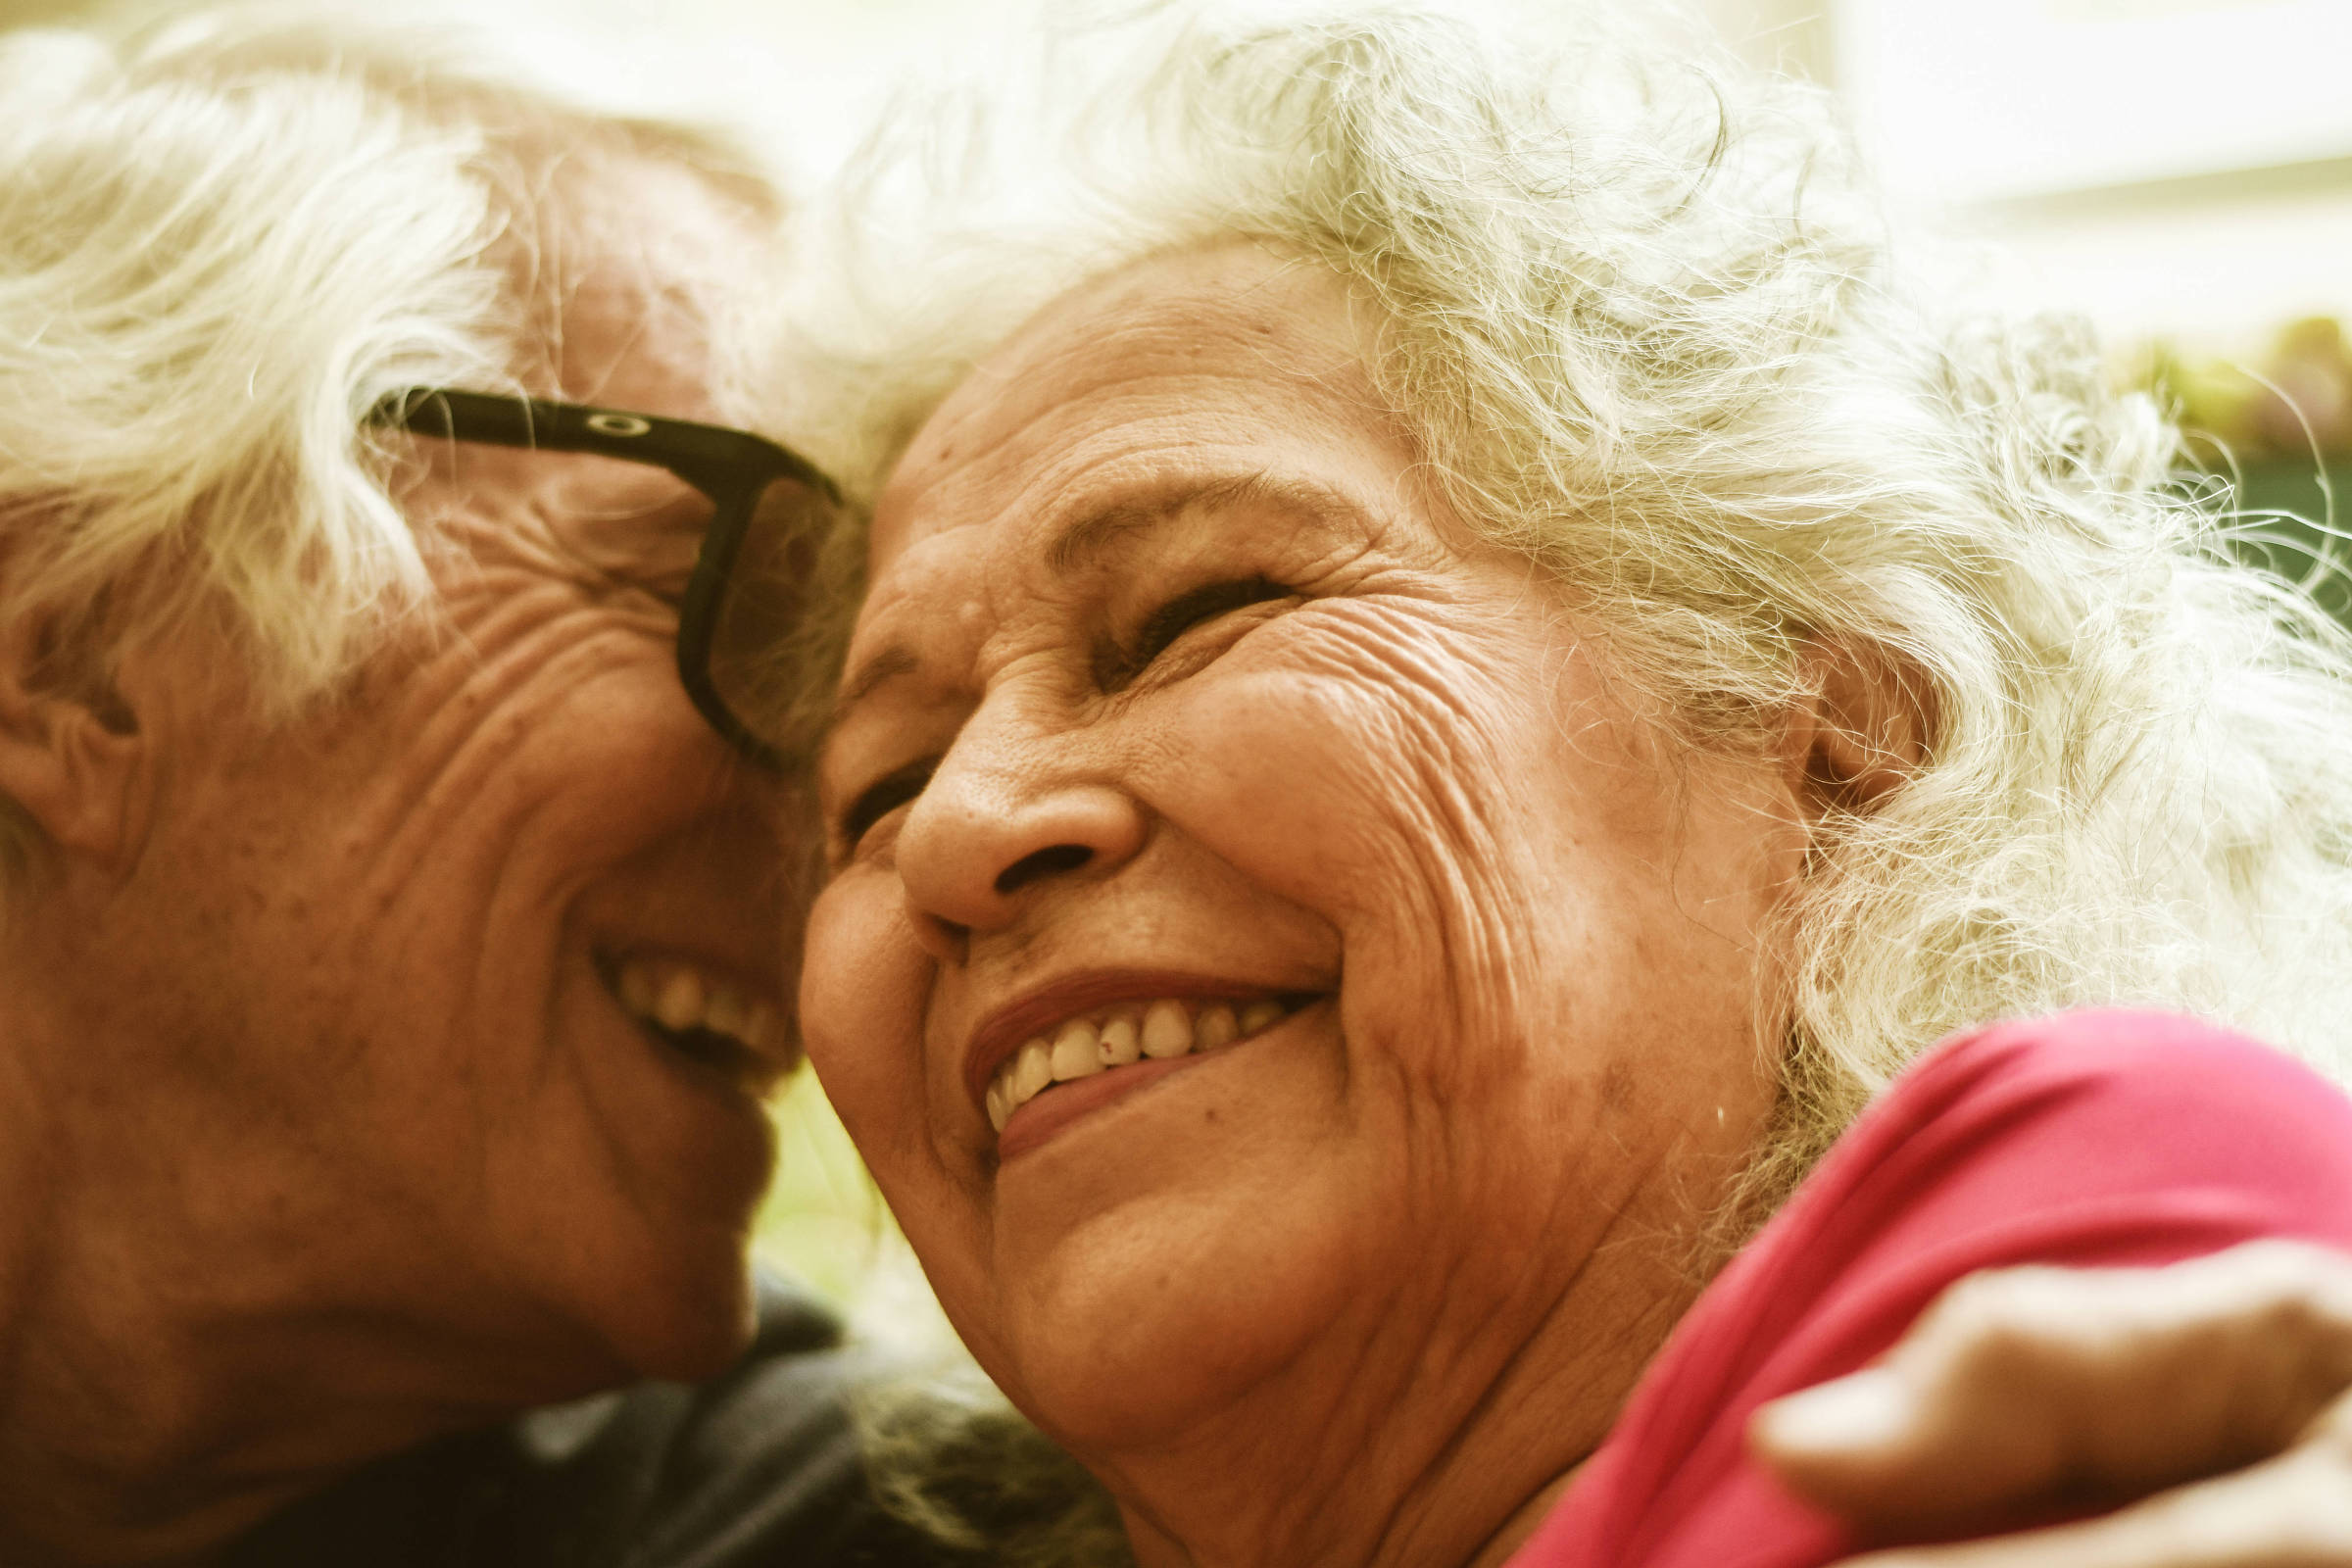 Dating in old age puts aside worries about the body